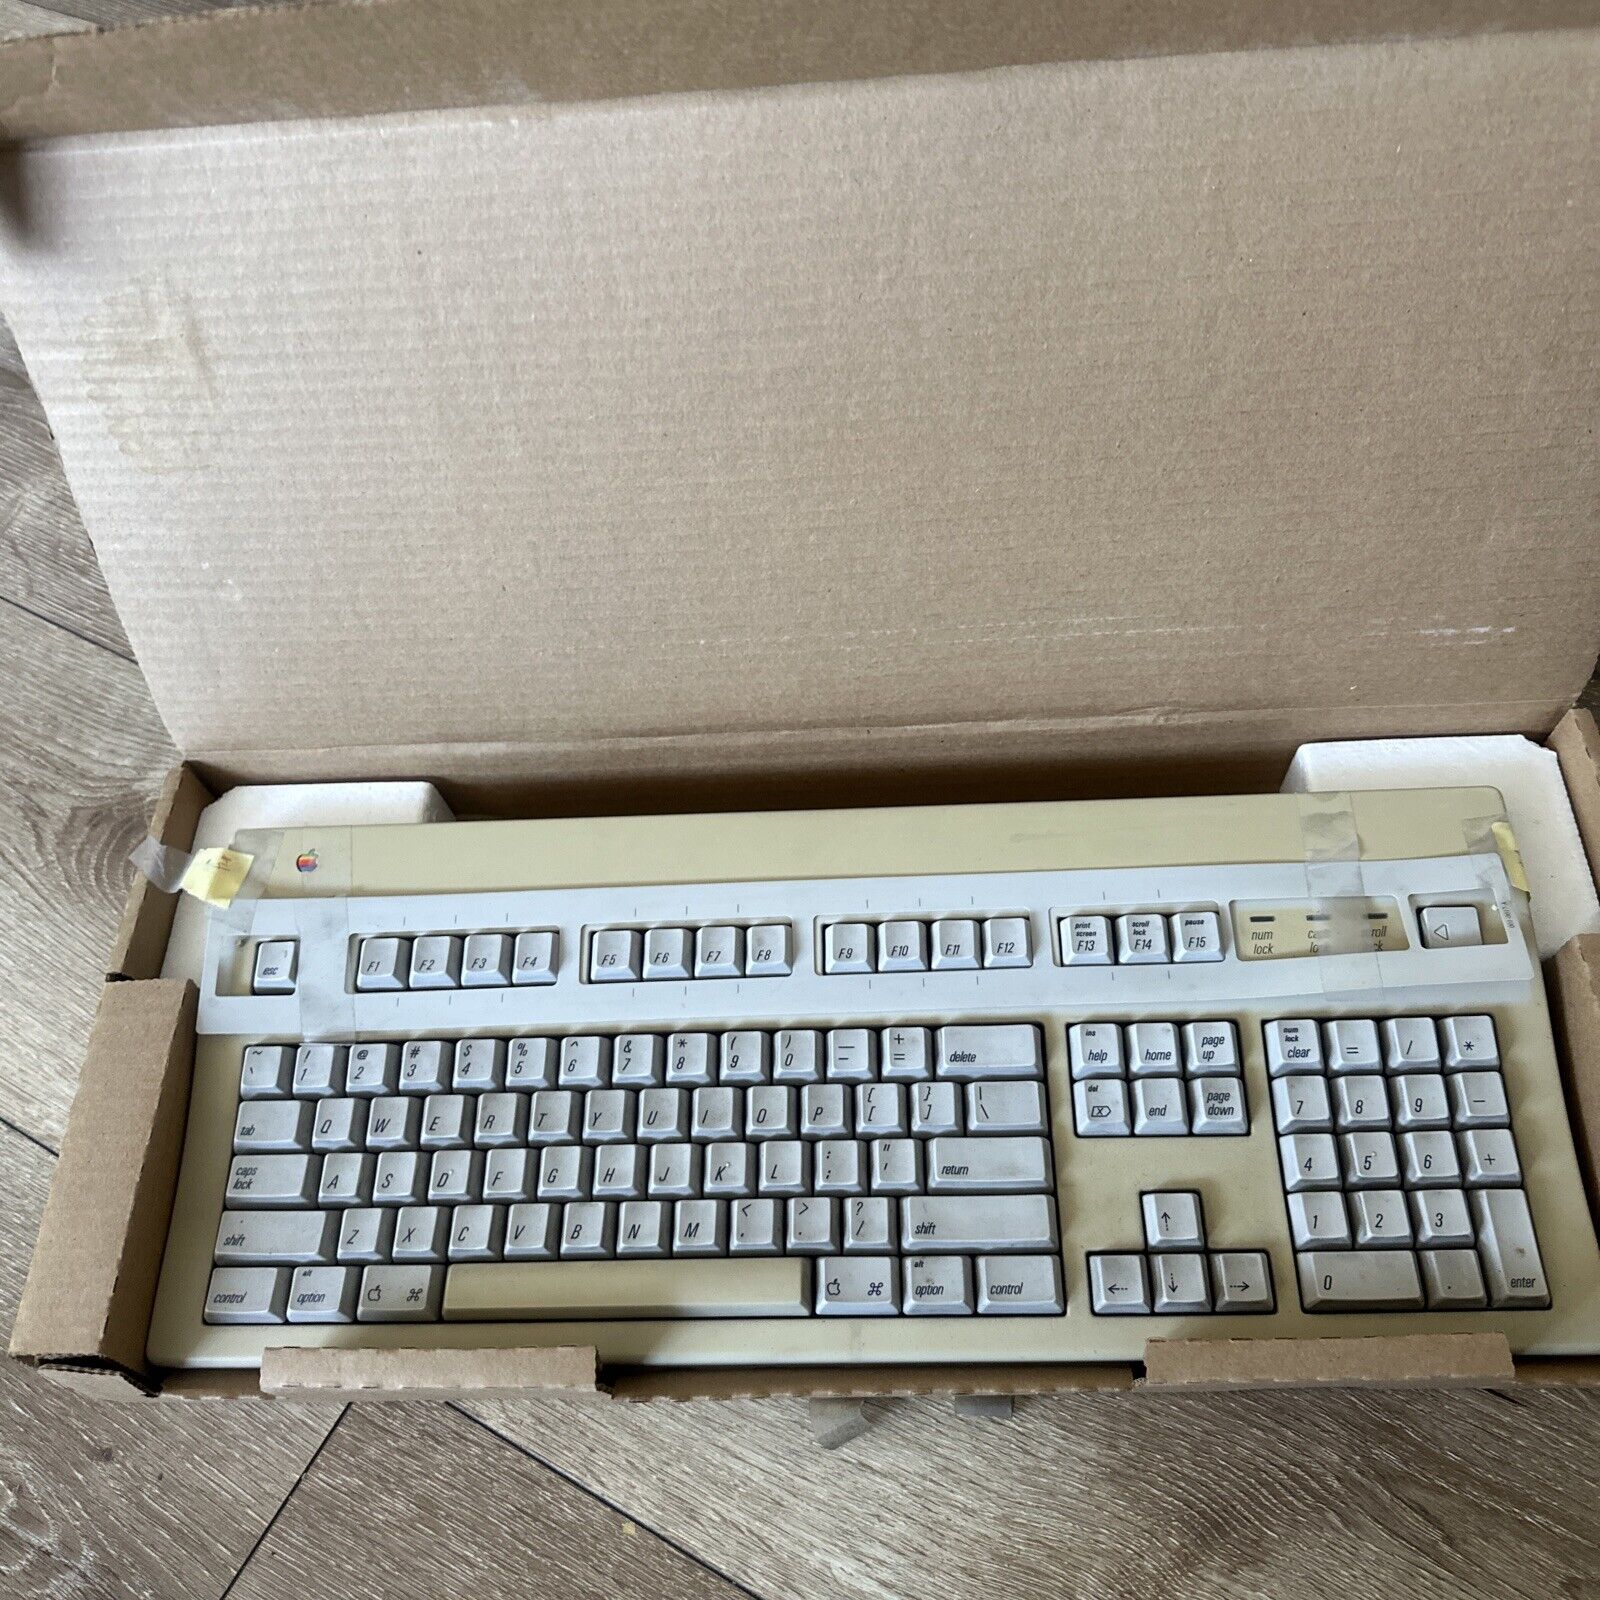 Vintage Apple Extended Keyboard II Model M3501 - Original box, No Cable